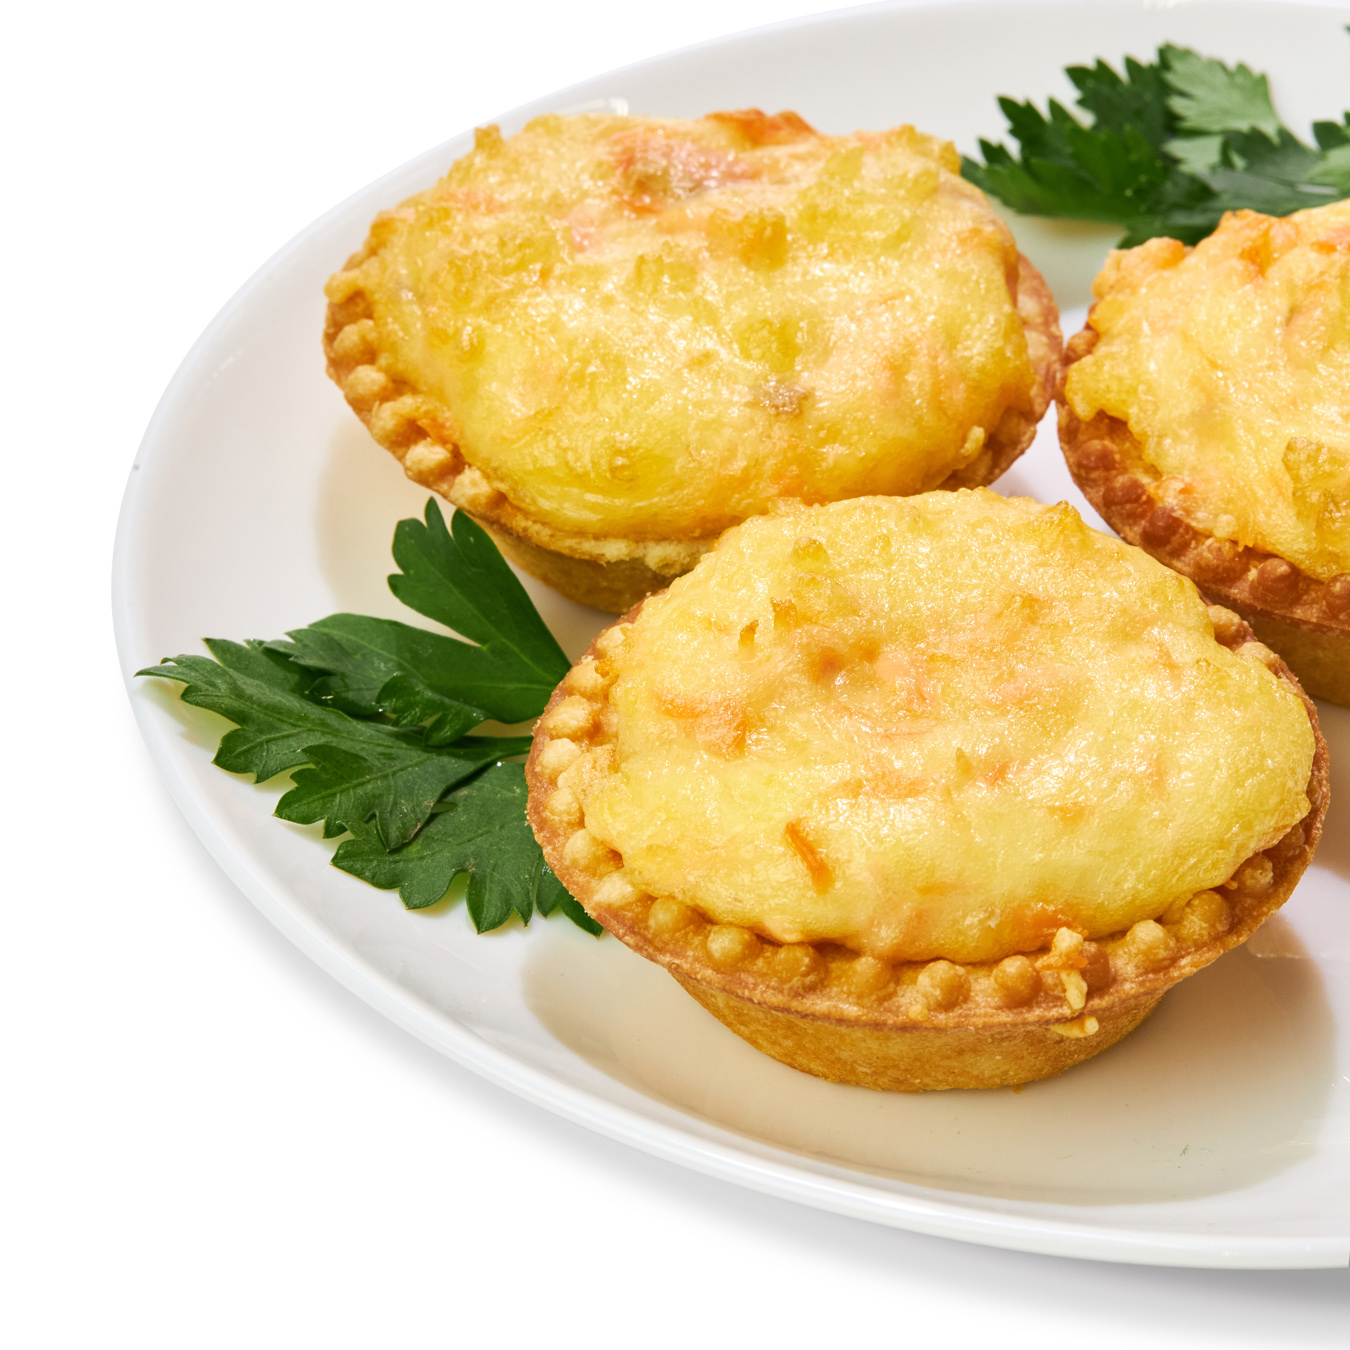 Mini tart with cheese and red fish pcs